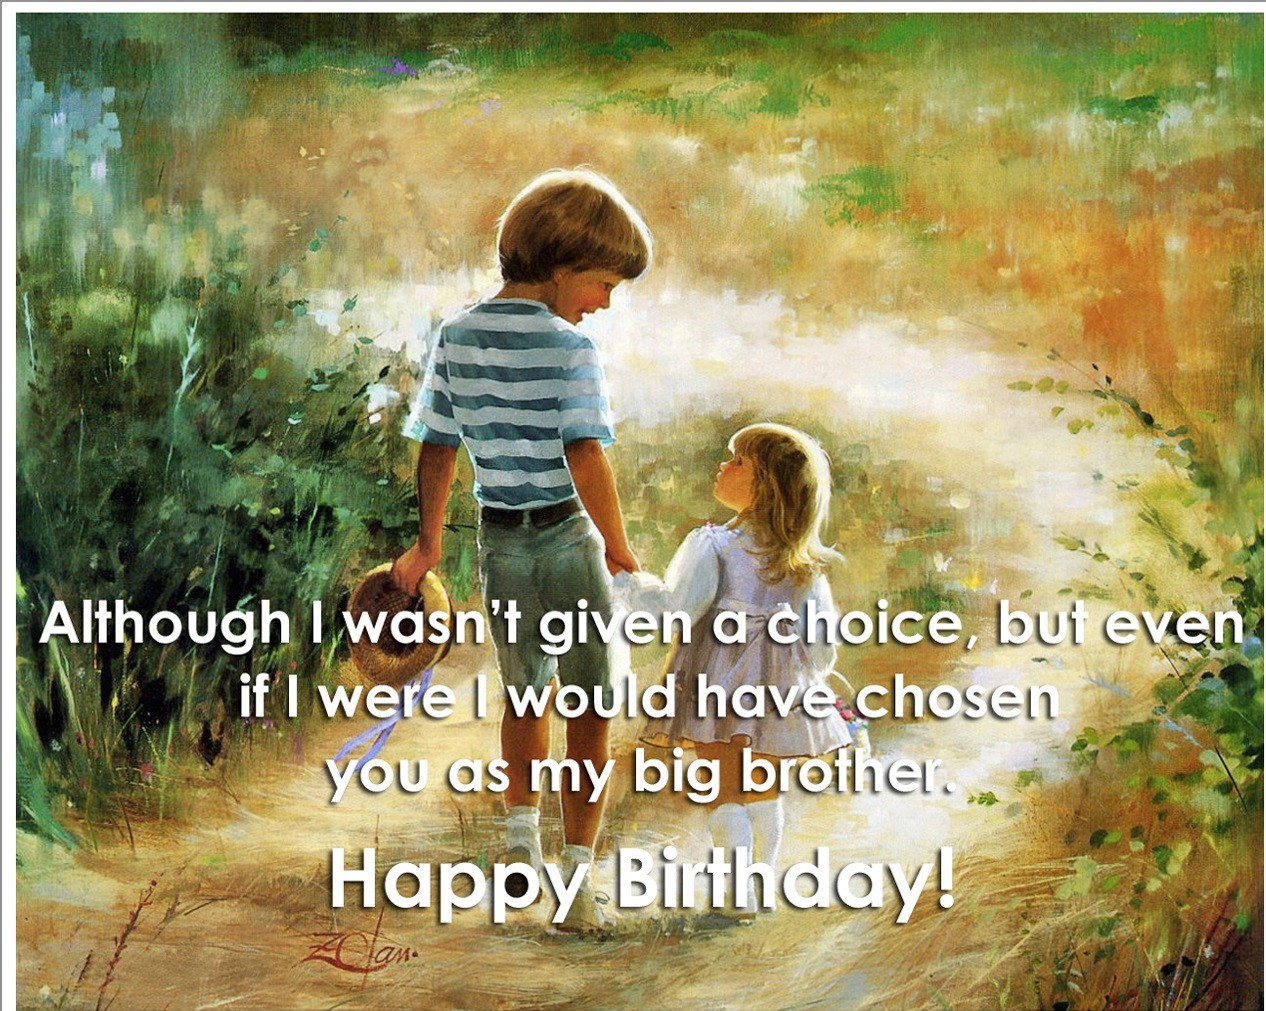 Big Brother Birthday Quotes
 Cute Happy Birthday Quotes wishes for brother This Blog